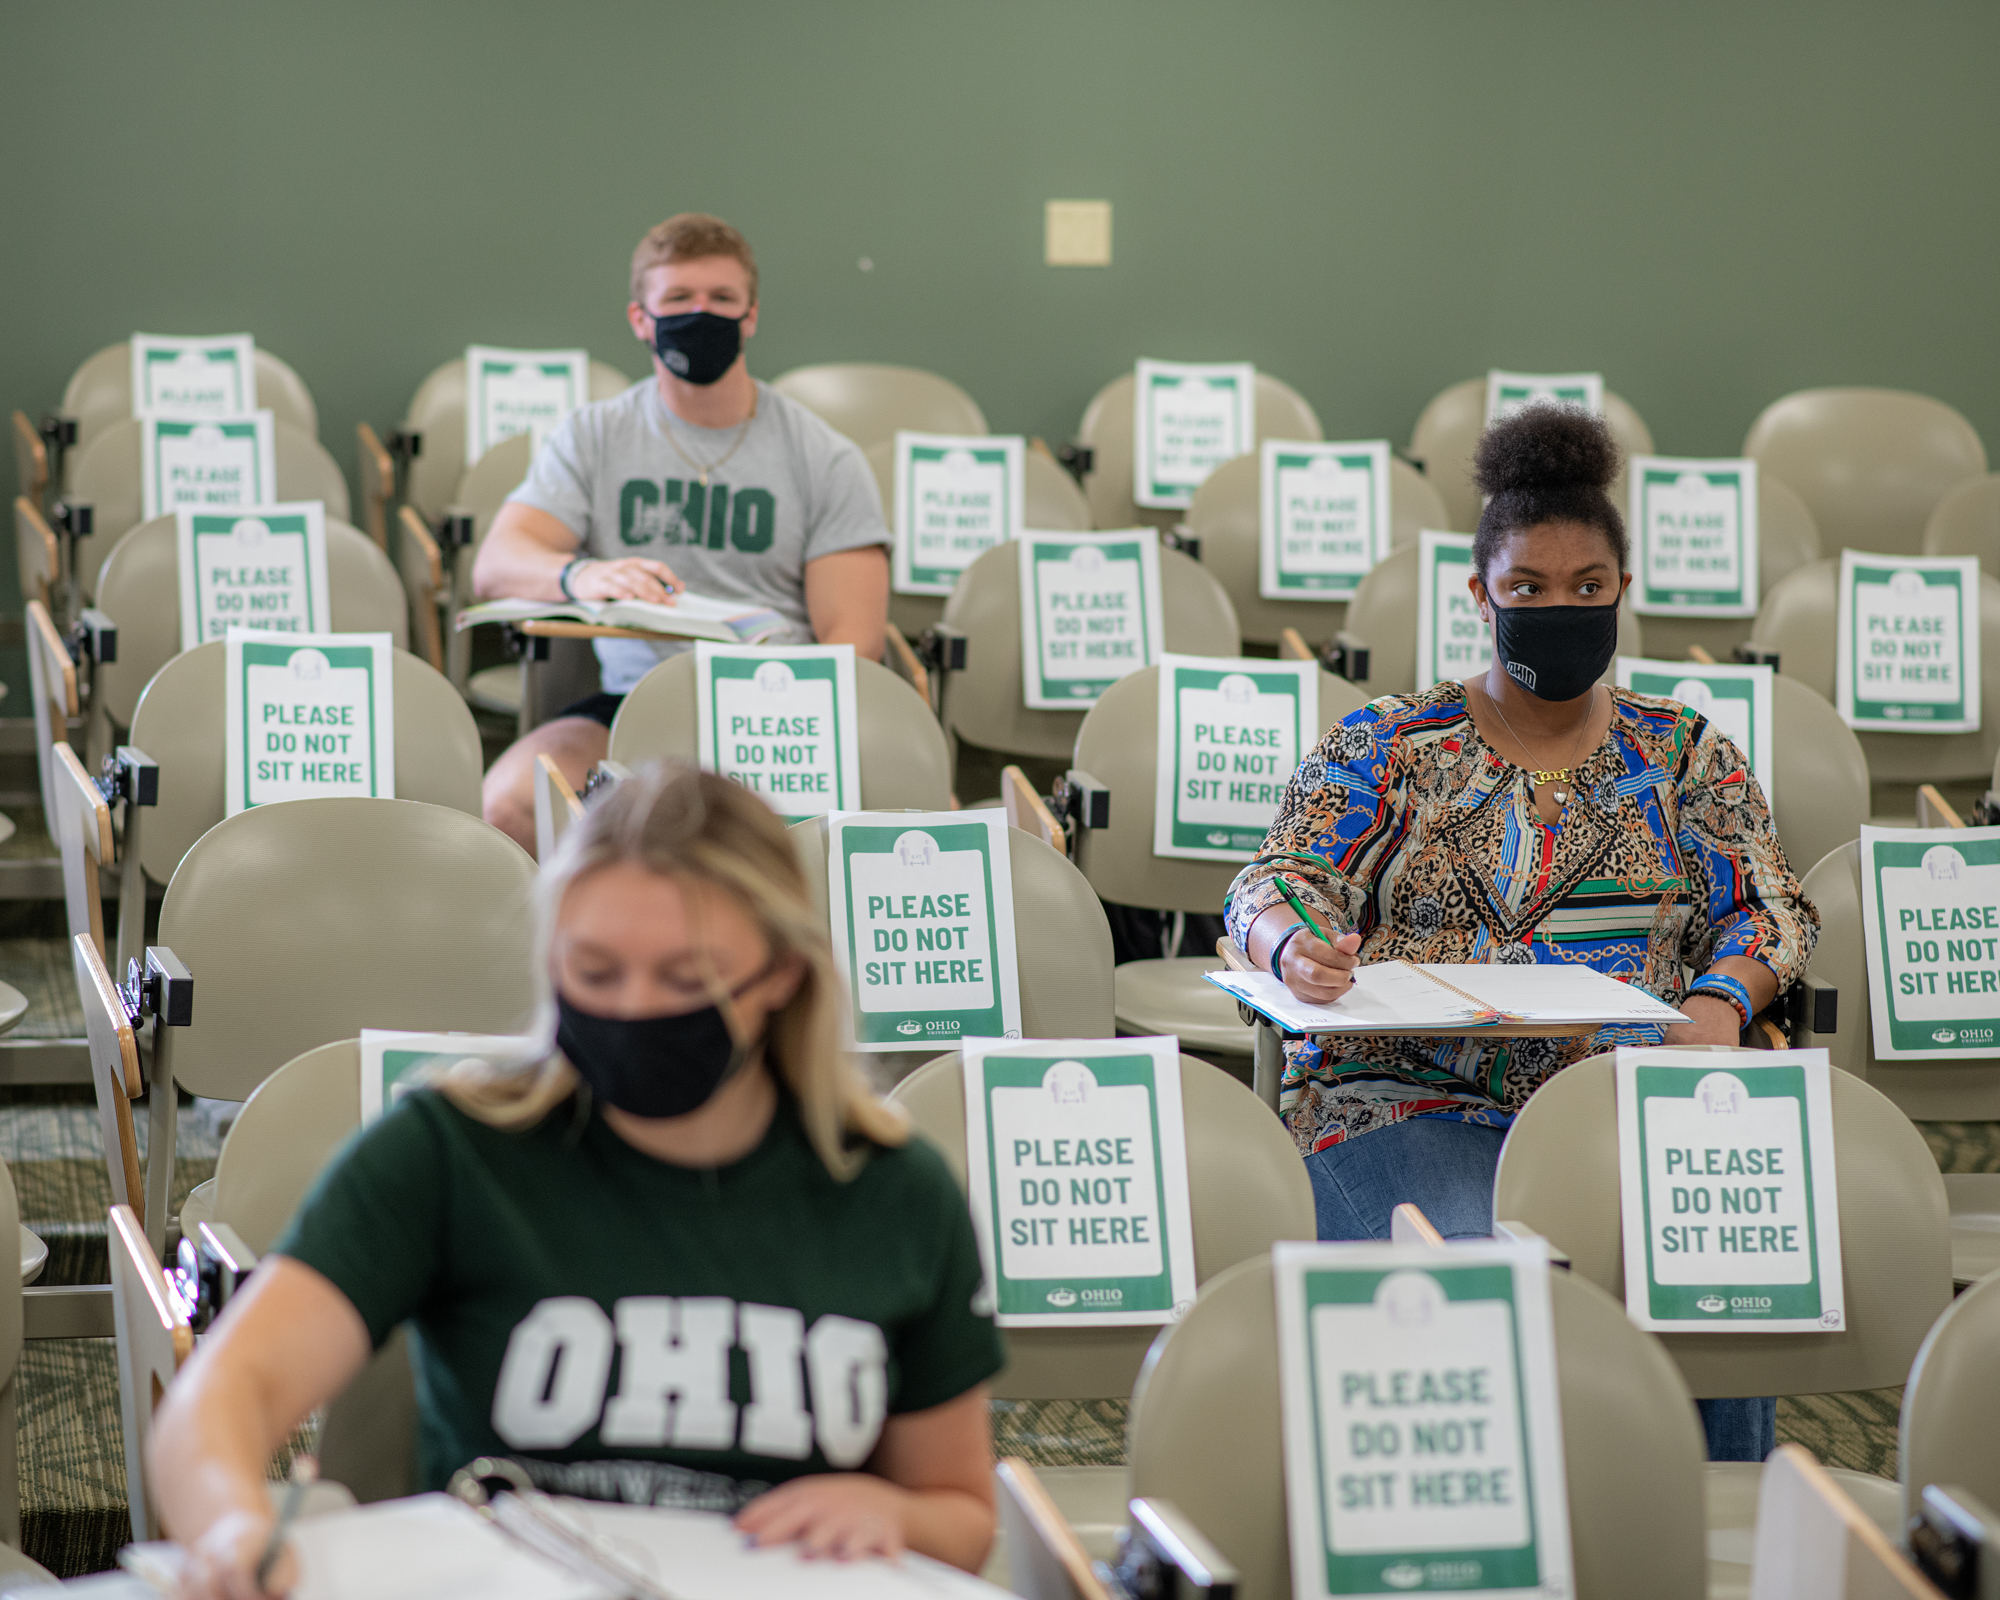 Students sitting in a sparsely attended lecuture hall wearing masks